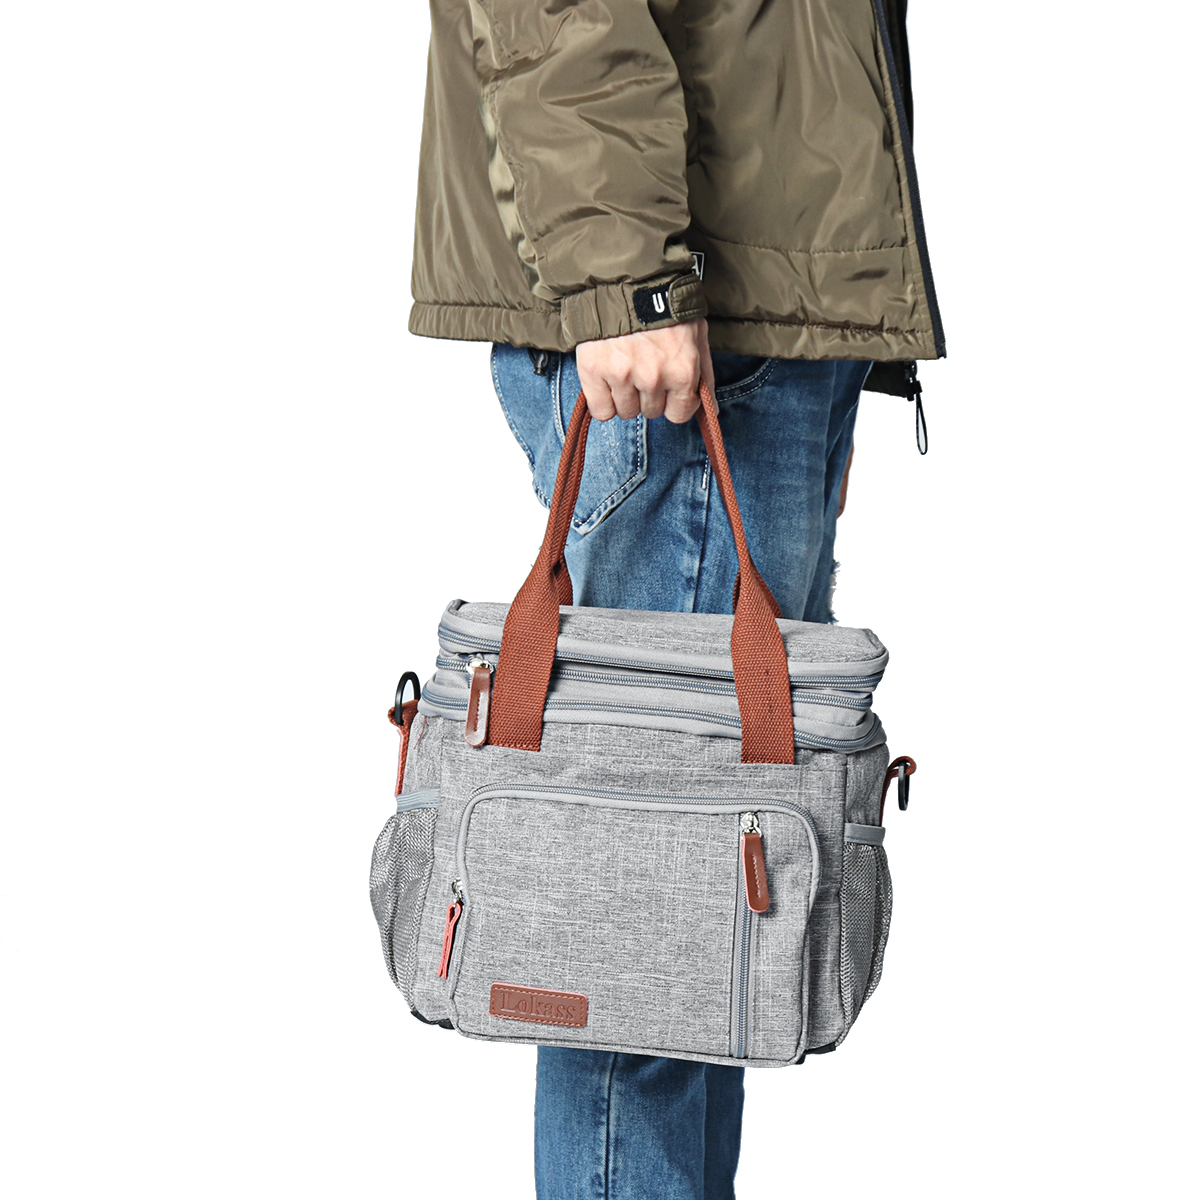 Expandable-Large-Capacity-with-Multiple-Pockets-Leak-proof-Drinks-Lunch-Insulated-Bag-Picnic-Storage-1863622-11